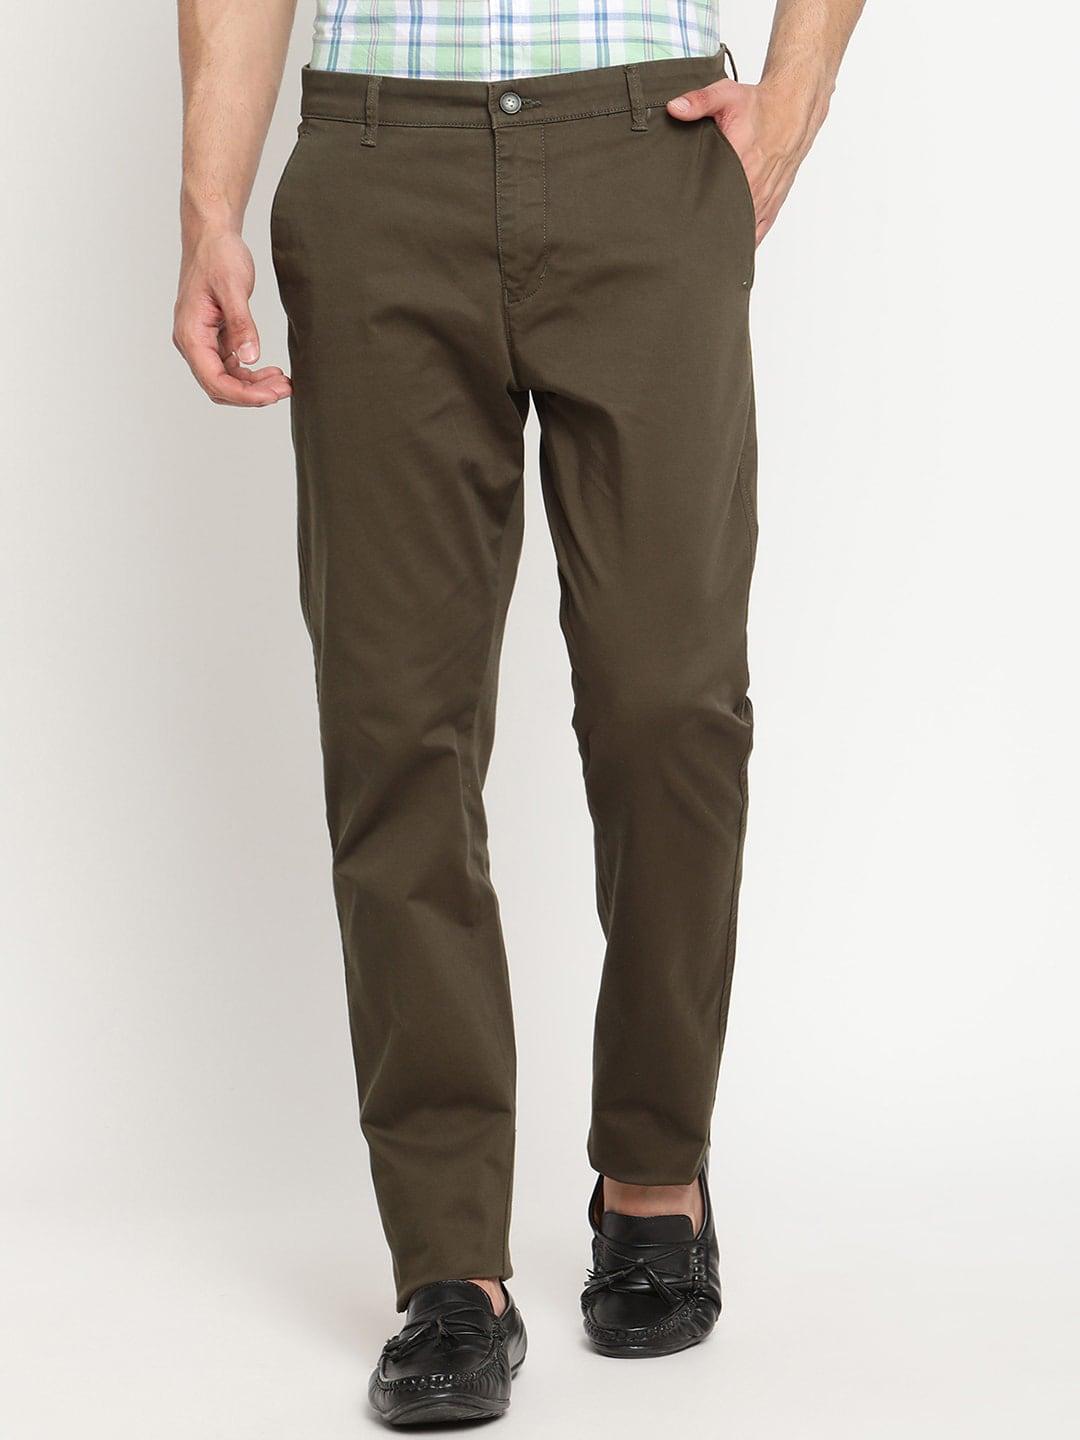 cantabil-men-olive-green-original-mid-rise-casual-trousers